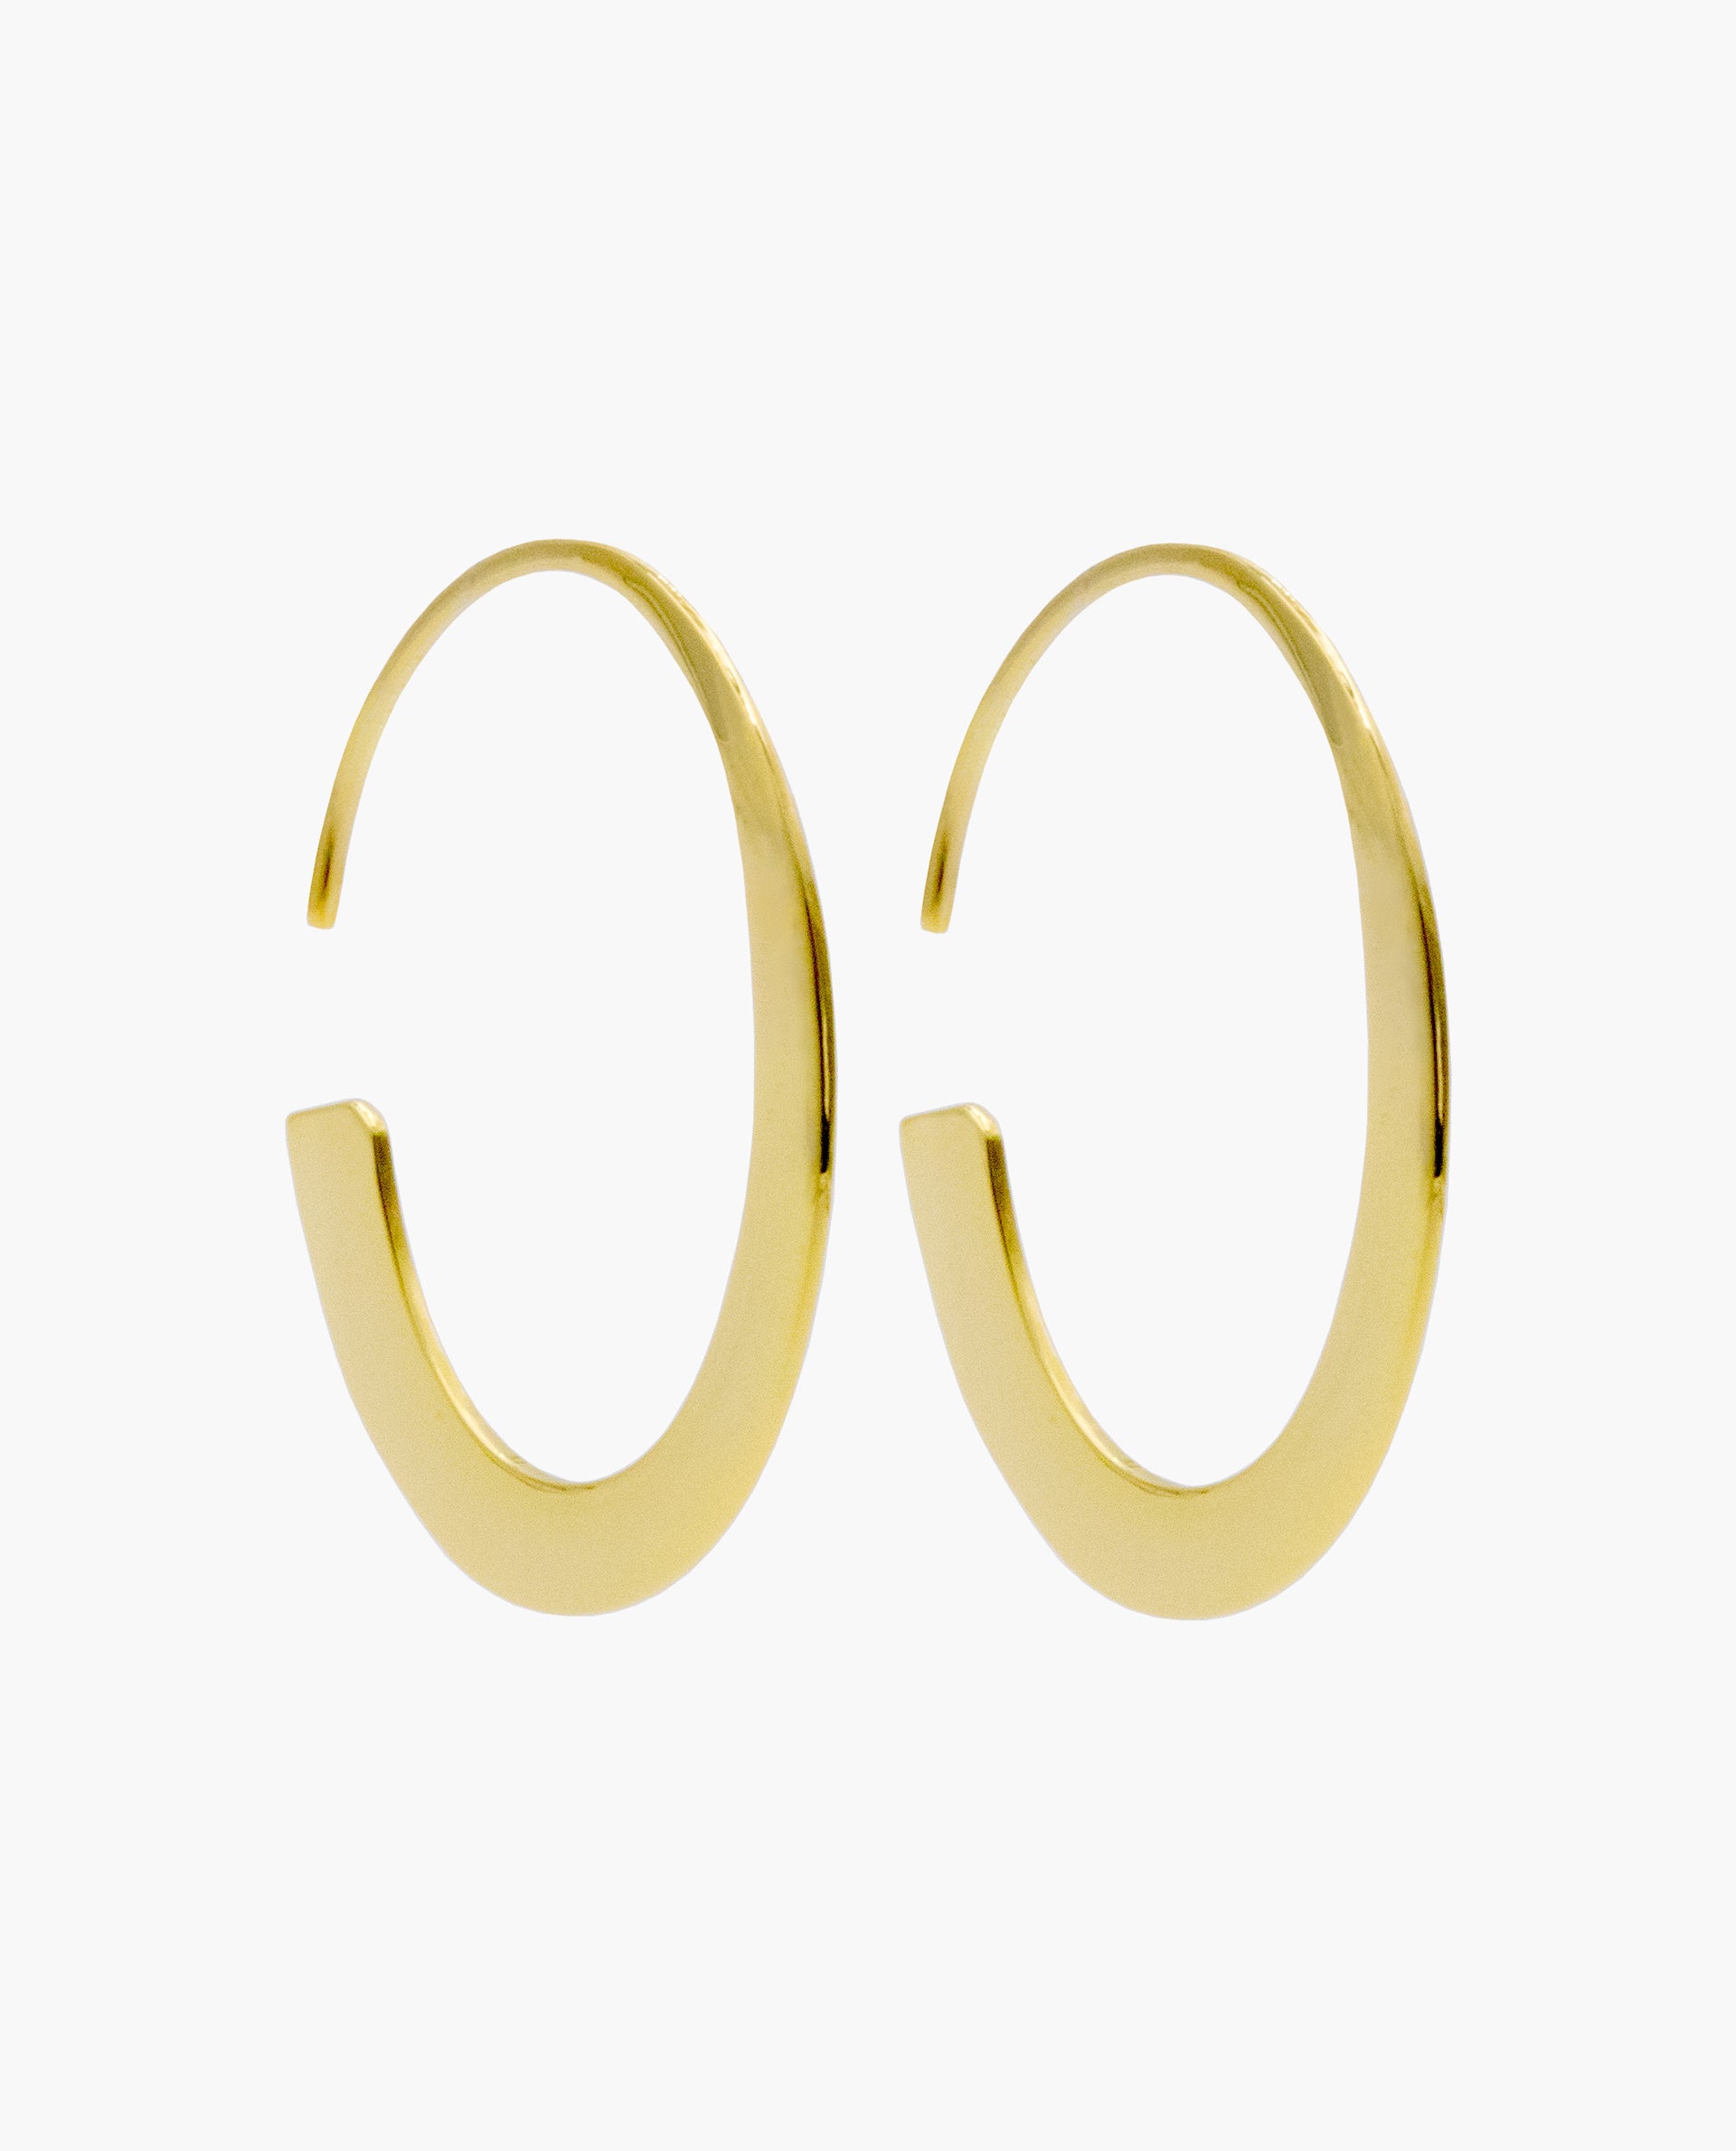 CURVE EARRINGS - GOLD PLATED